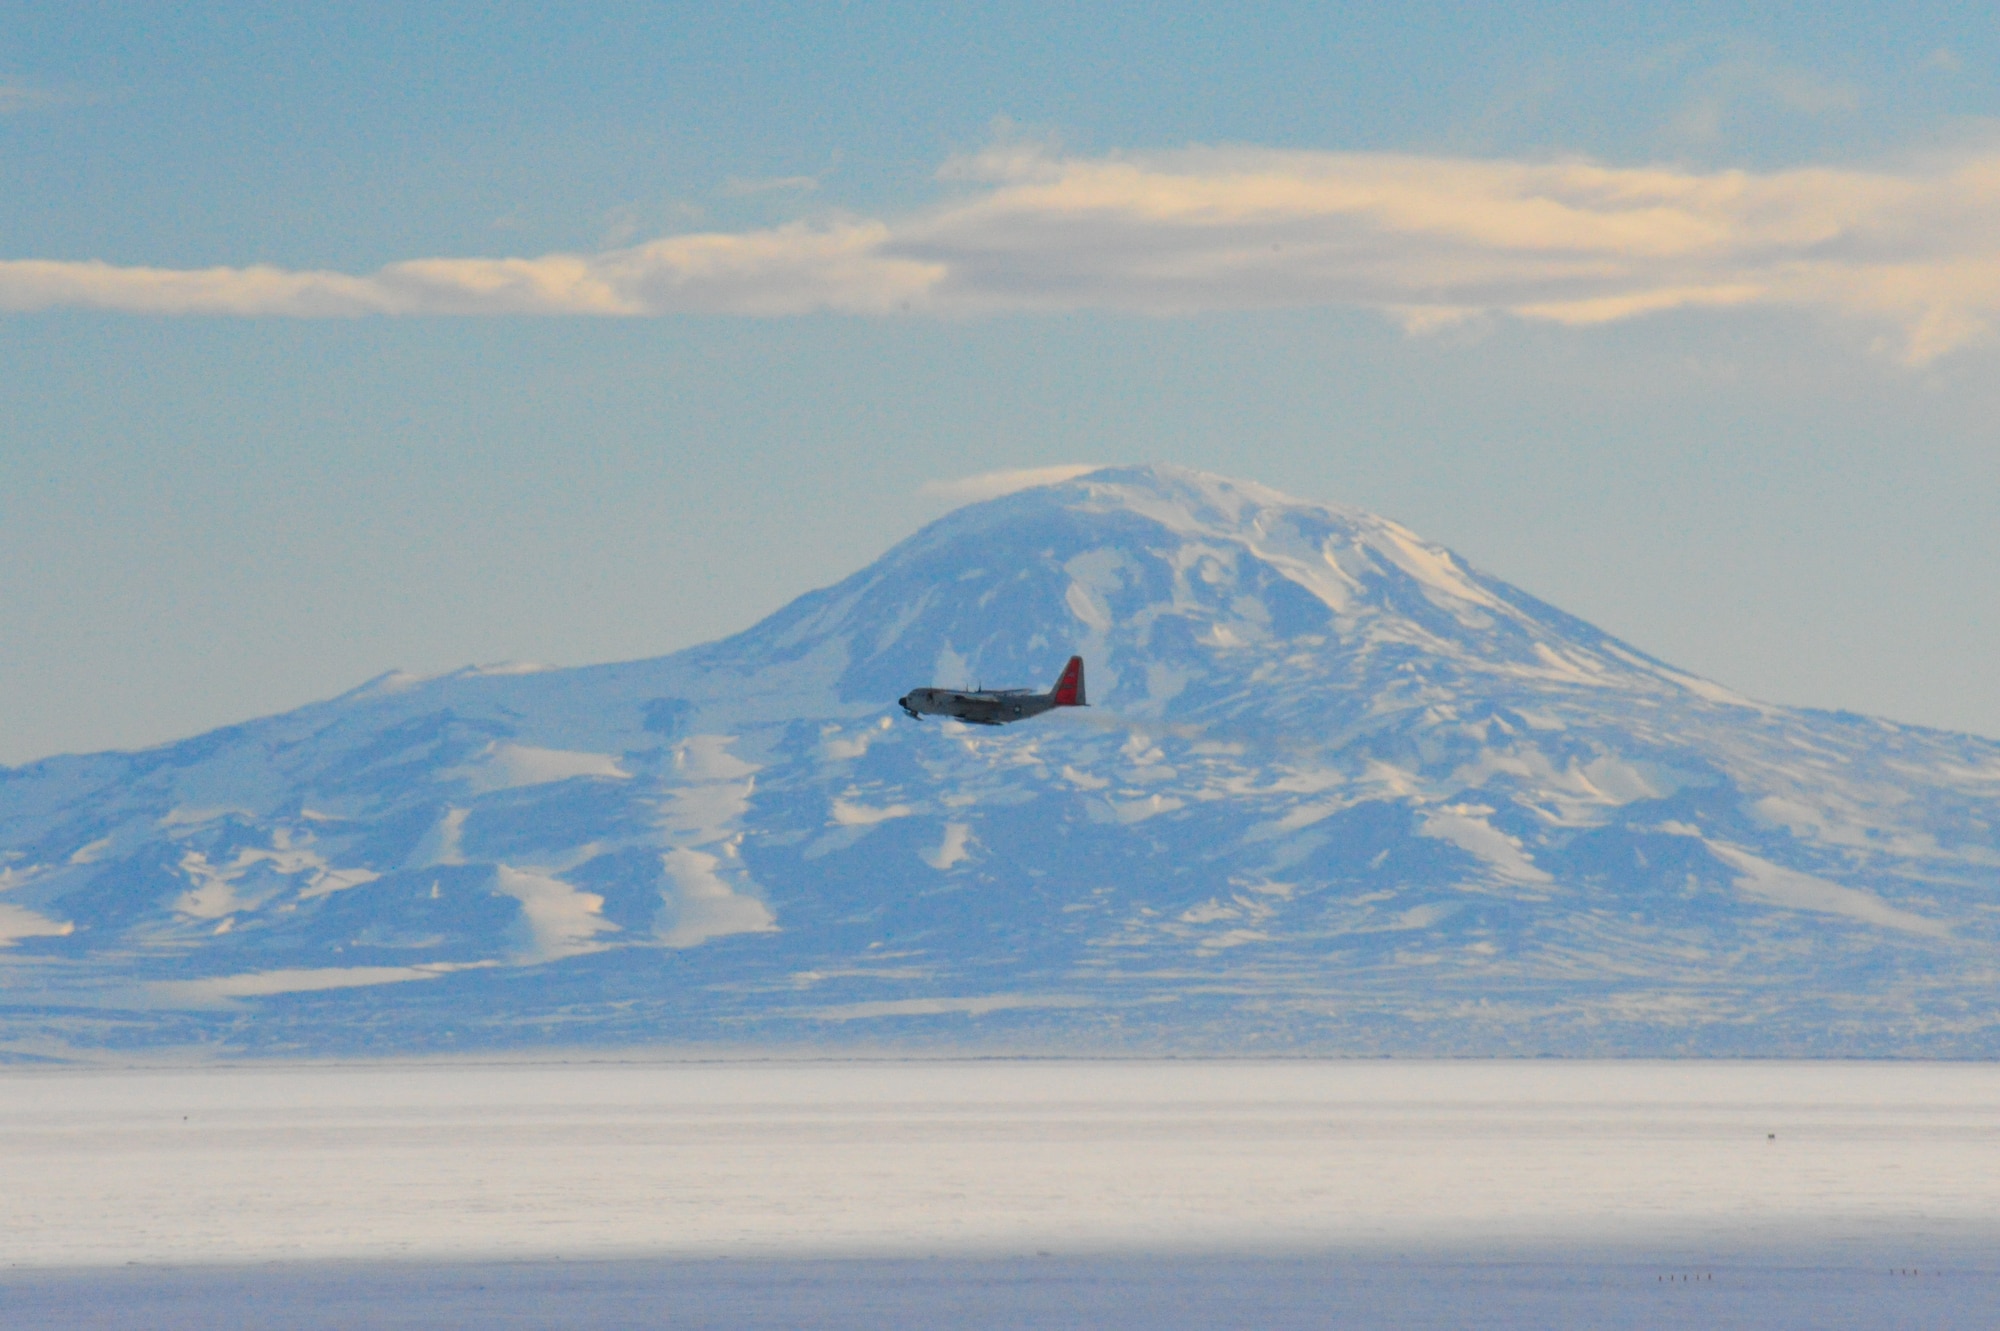 An LC-130 Ski-bird from Stratton Air National Guard Base, N.Y. flies past Mount Discovery near McMurdo Station, Antarctica, as part of Operation Deep Freeze 2010-2011. ODF is the U.S. military's operational and logistic support of the NSF's scientific research activities in Antarctica.  (U.S. Air Force photo/ Col Gary James).
